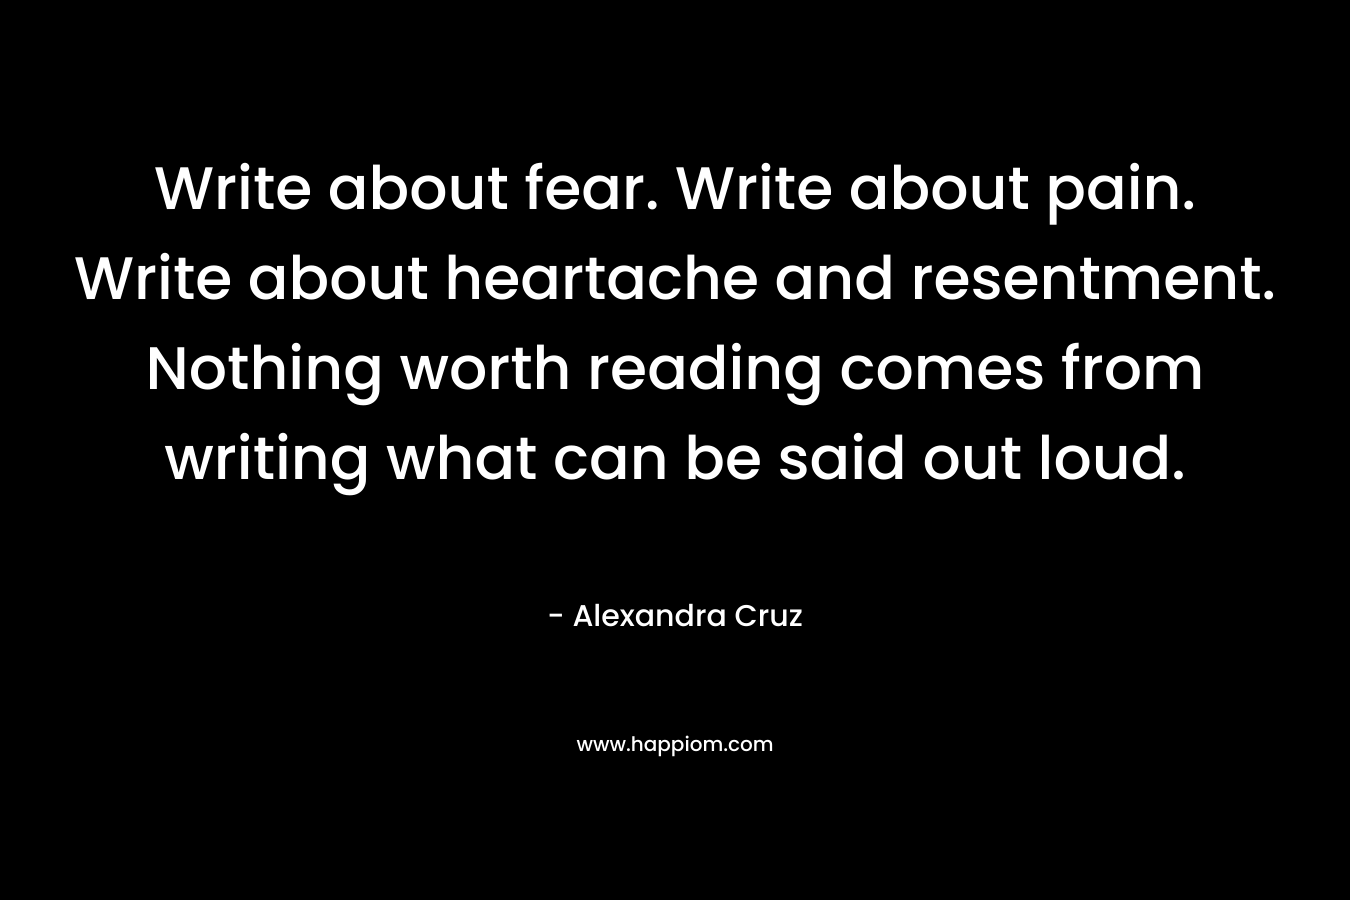 Write about fear. Write about pain. Write about heartache and resentment. Nothing worth reading comes from writing what can be said out loud.